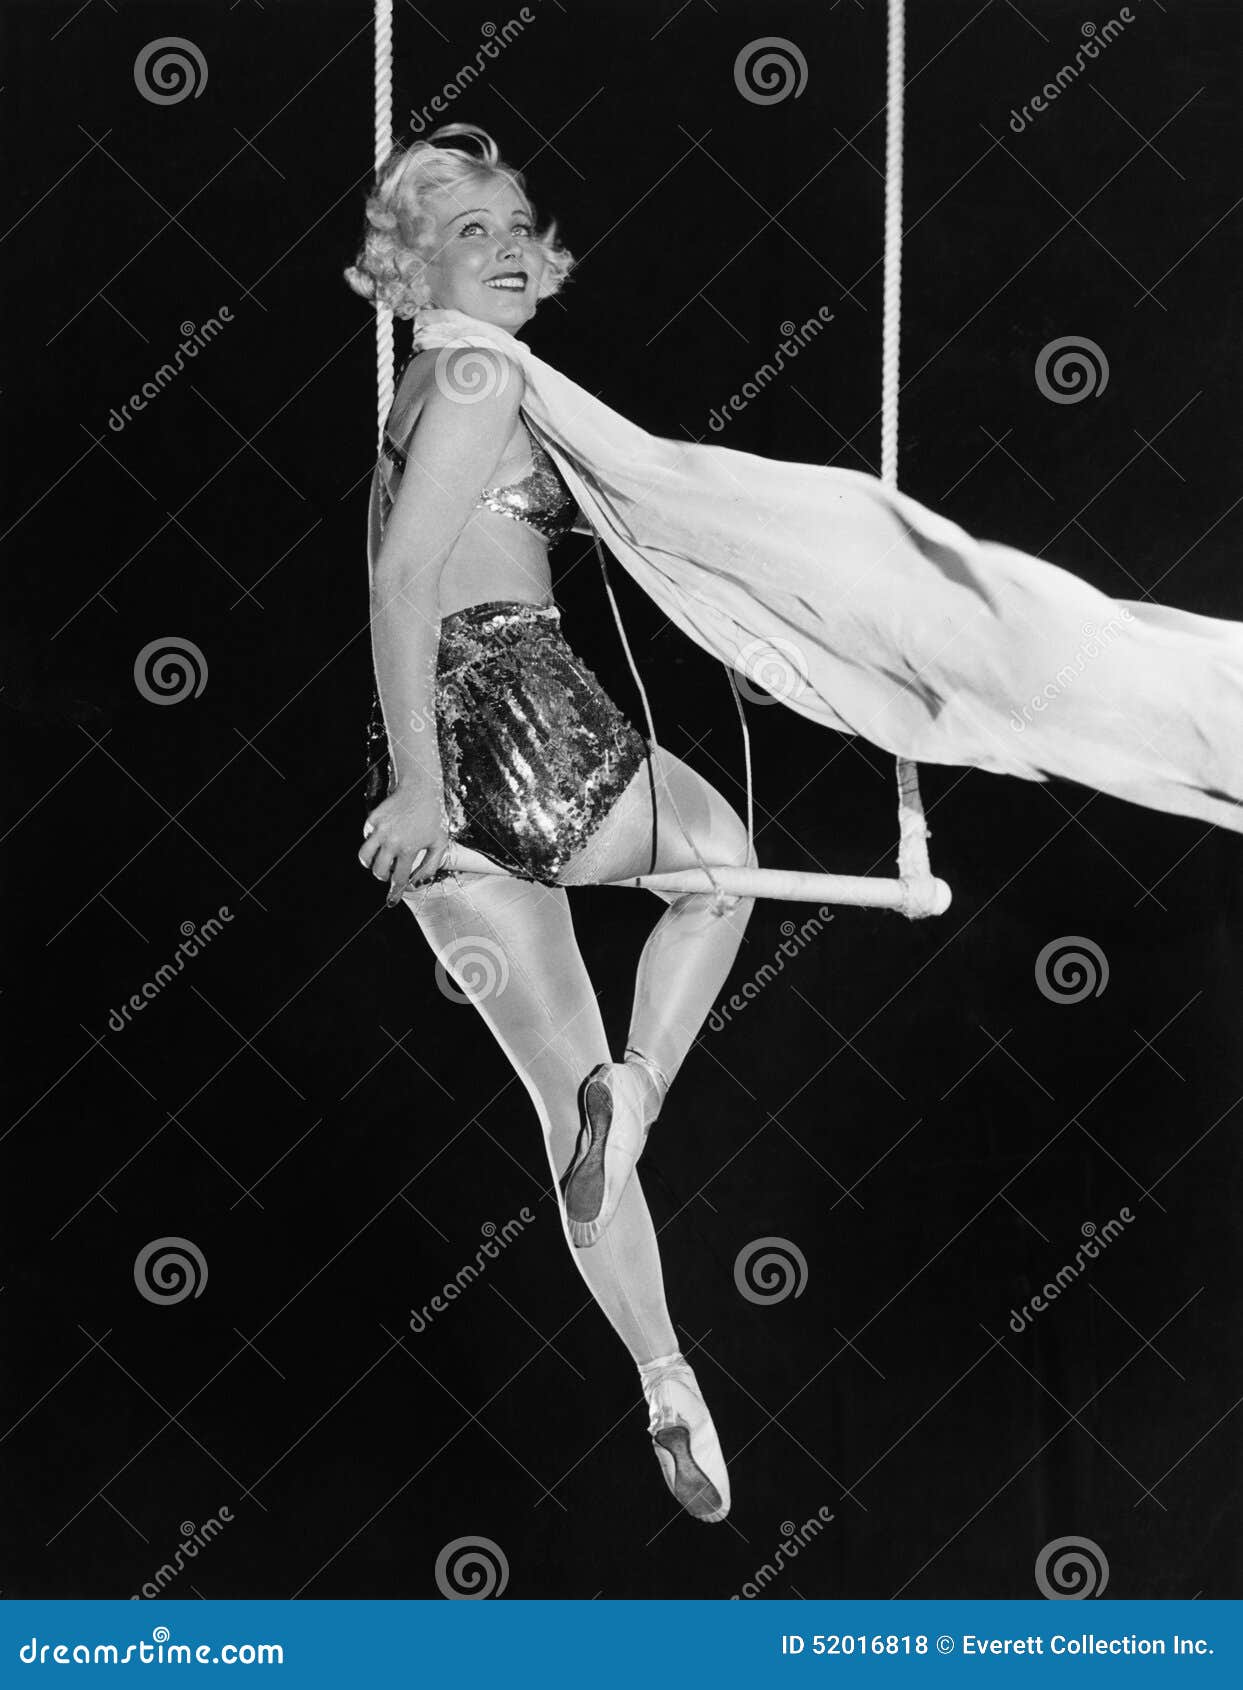 profile of a female circus performer performing on a trapeze bar